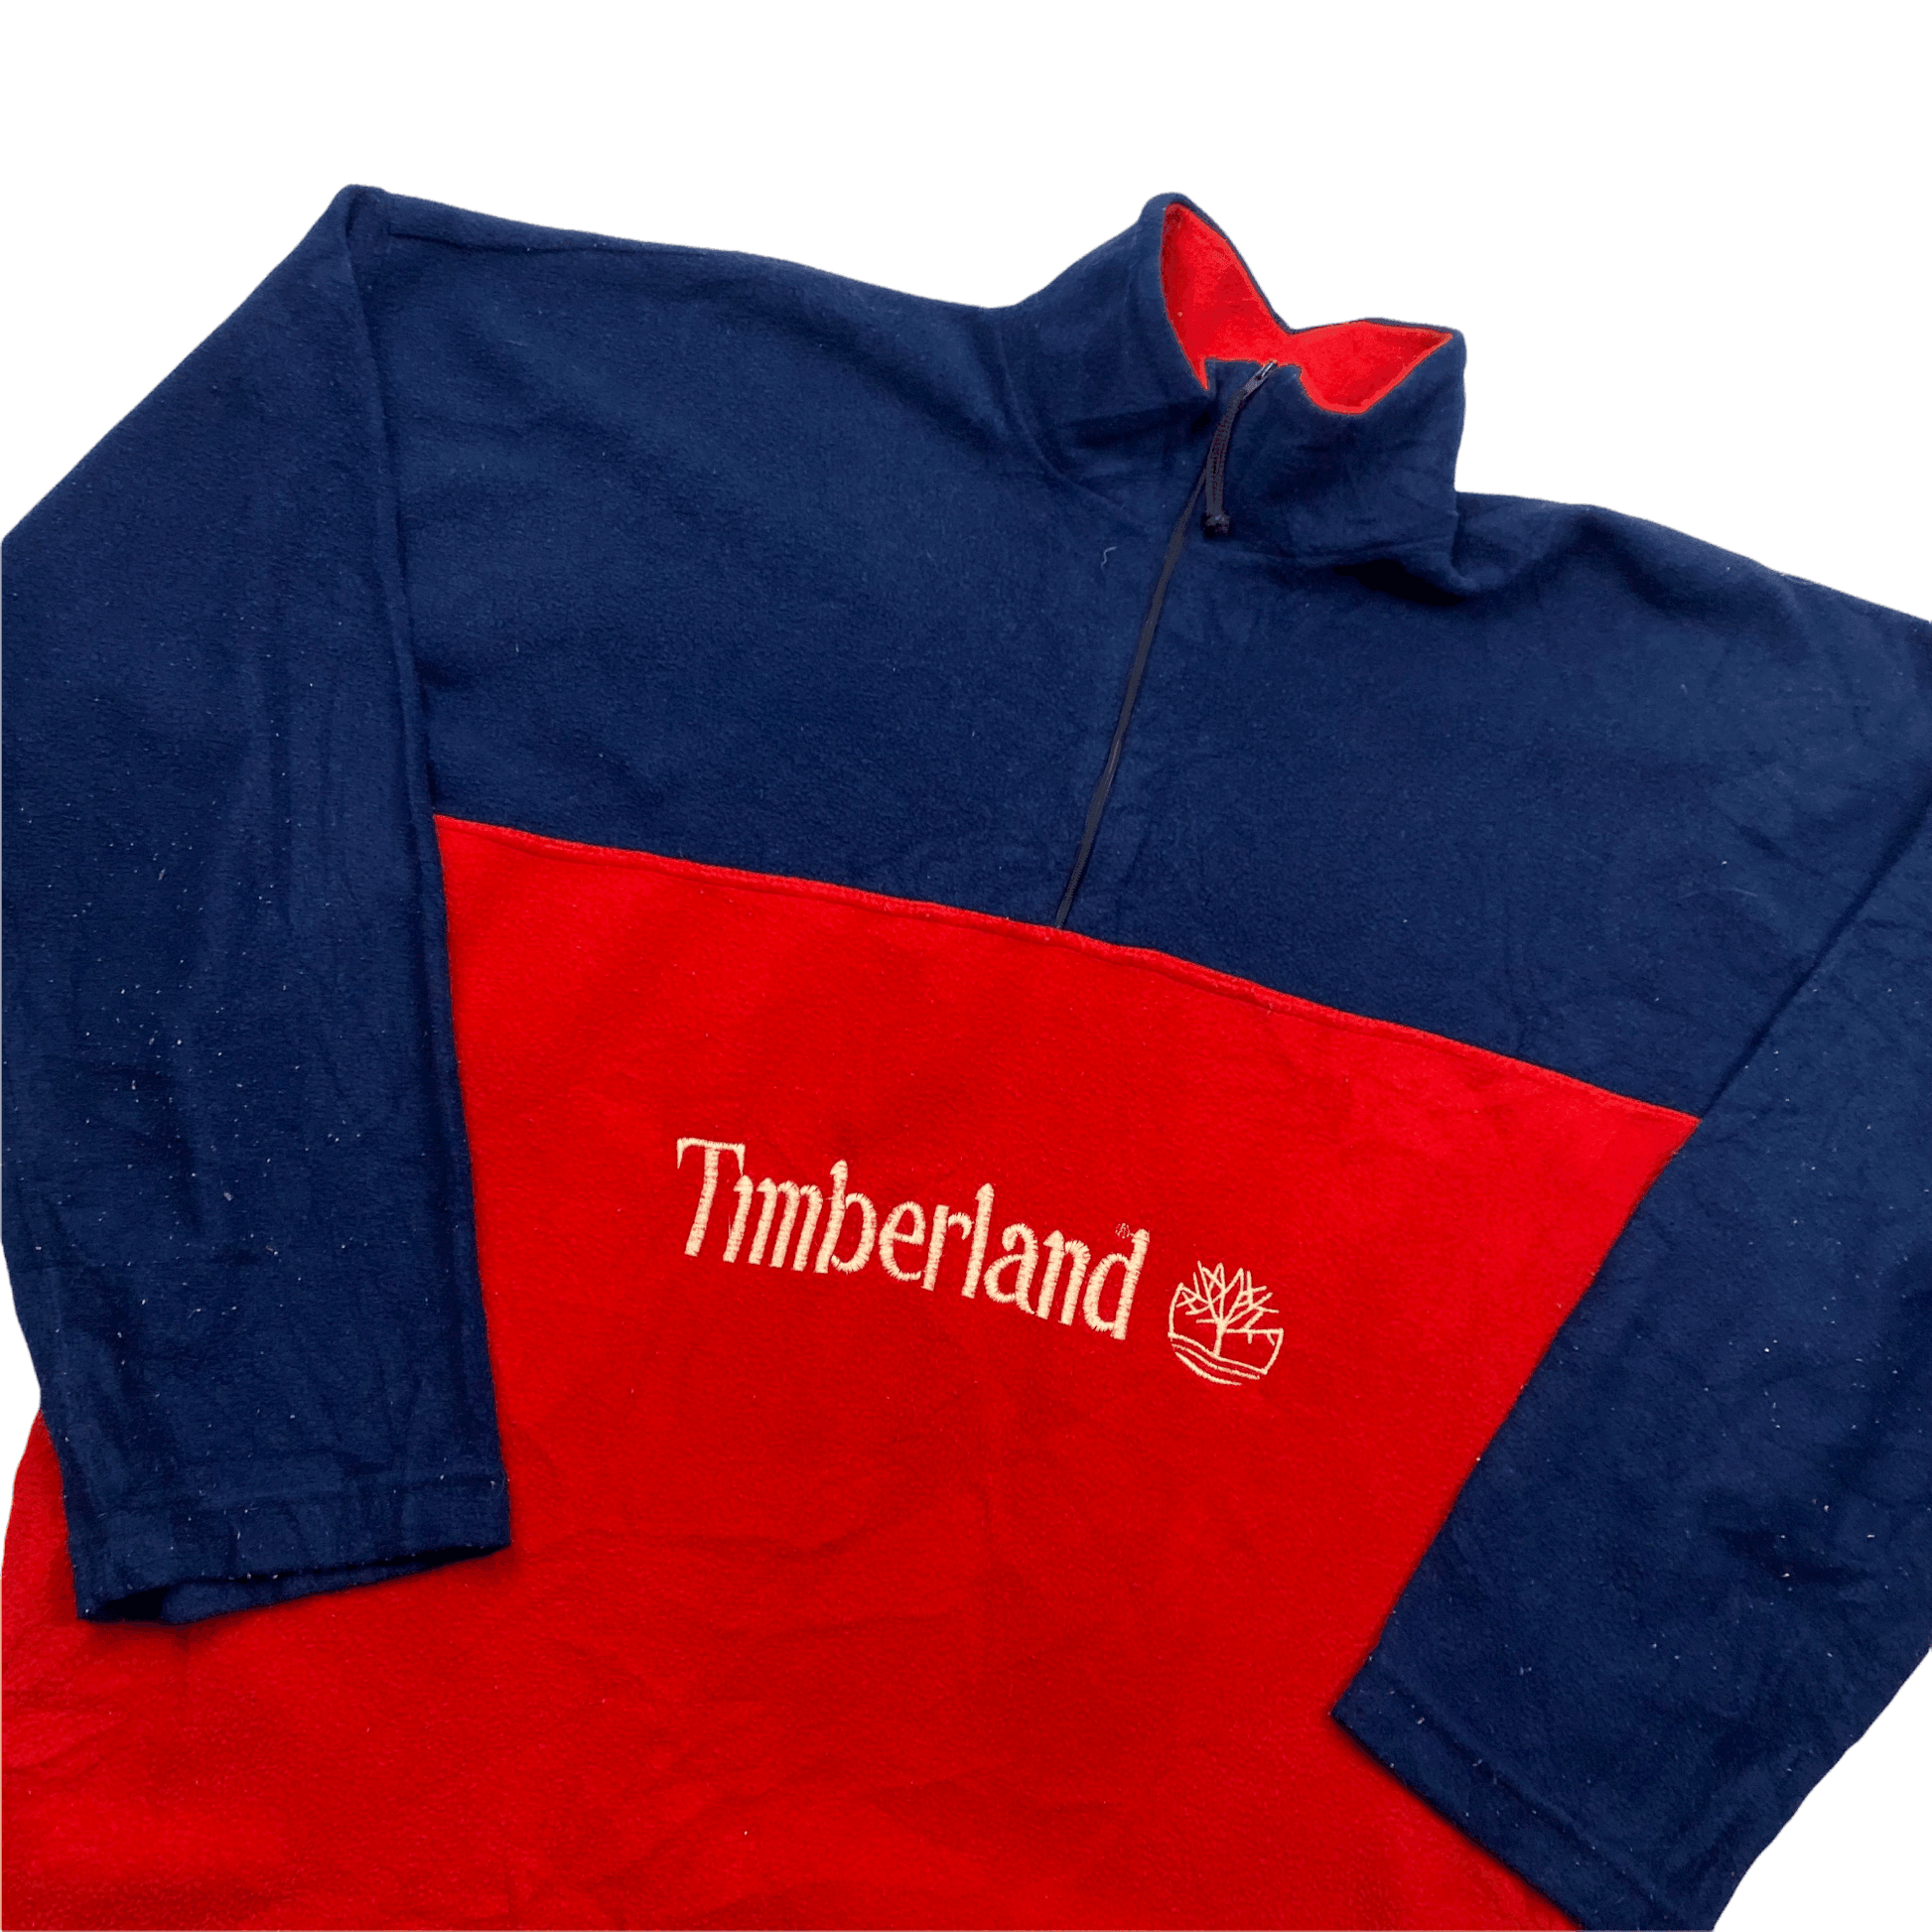 Vintage 90s Navy Blue + Red Timberland Spell-Out Quarter Zip Fleece - Large - The Streetwear Studio